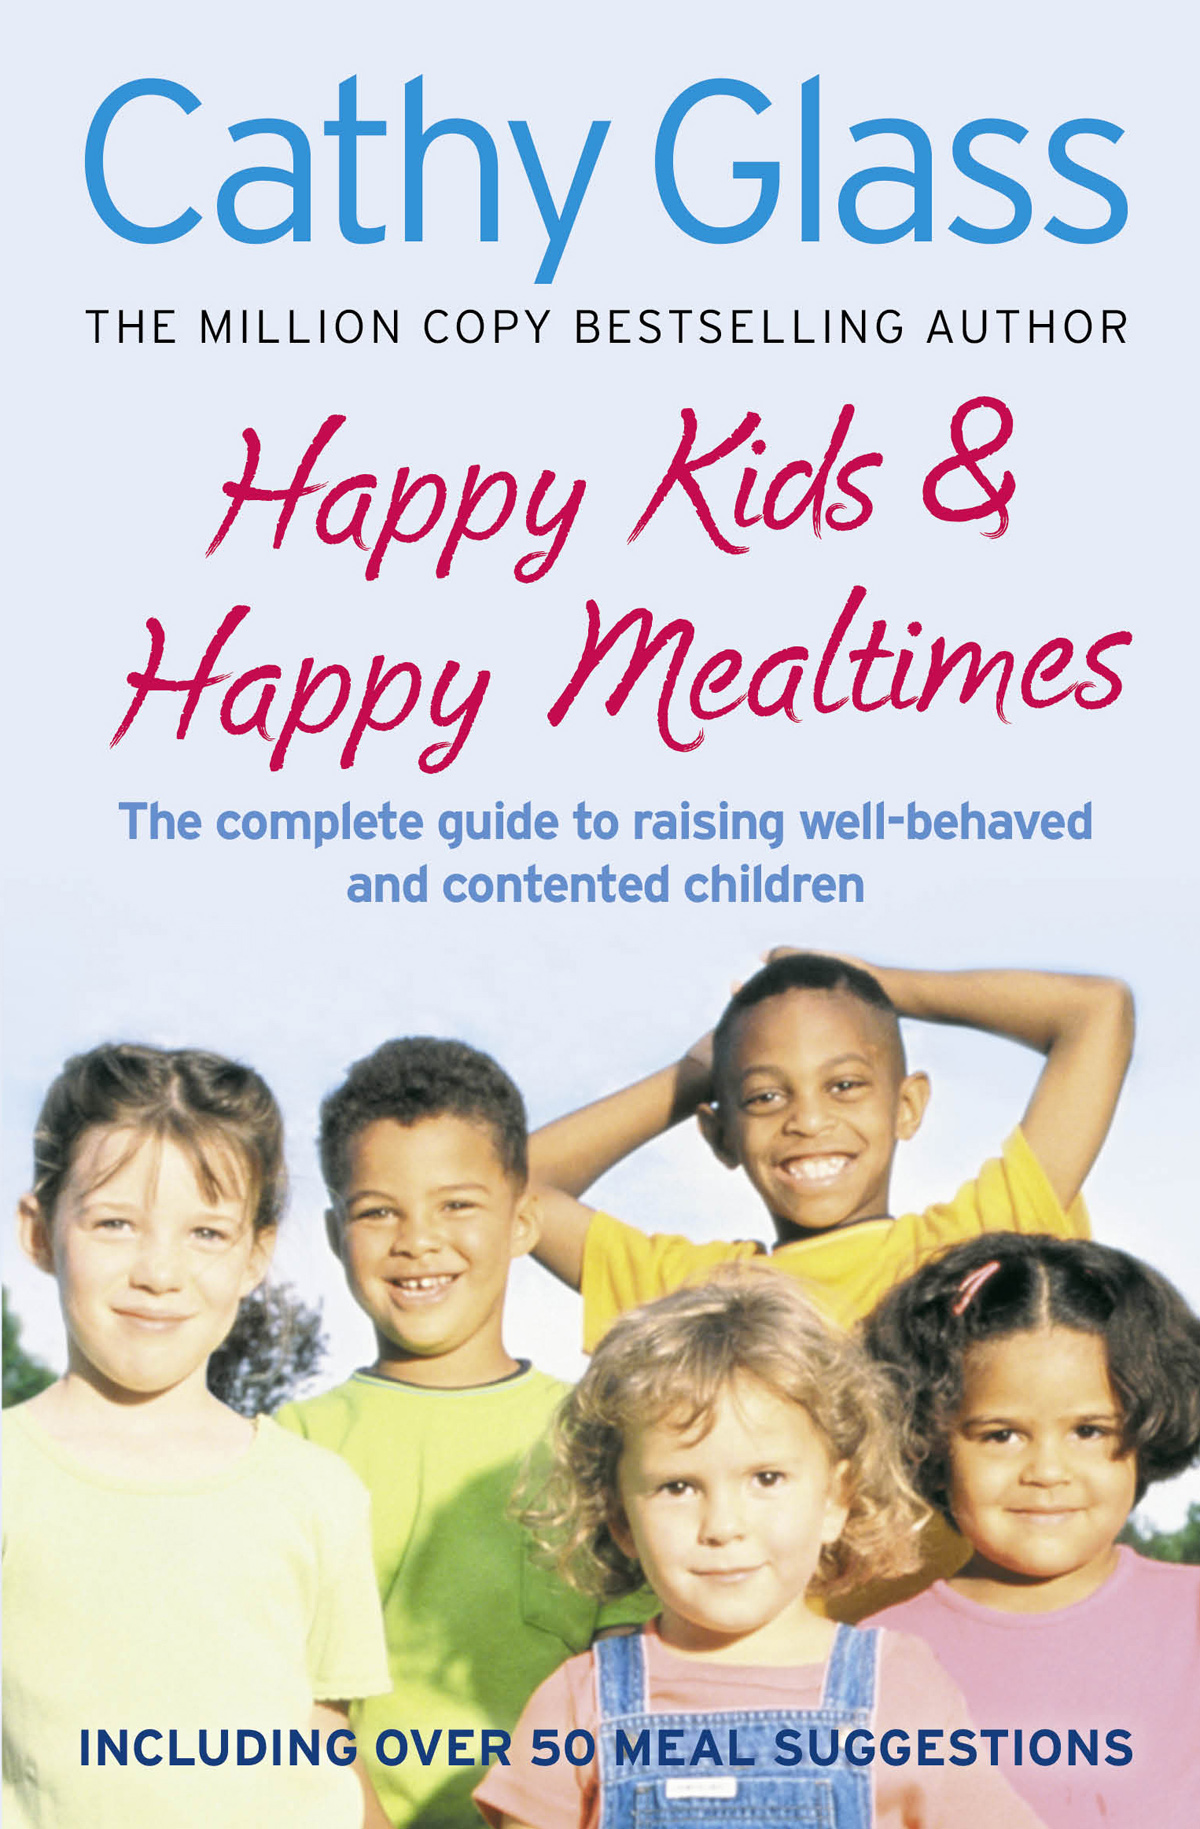 Happy Kids&Happy Mealtimes: The complete guide to raising contented children